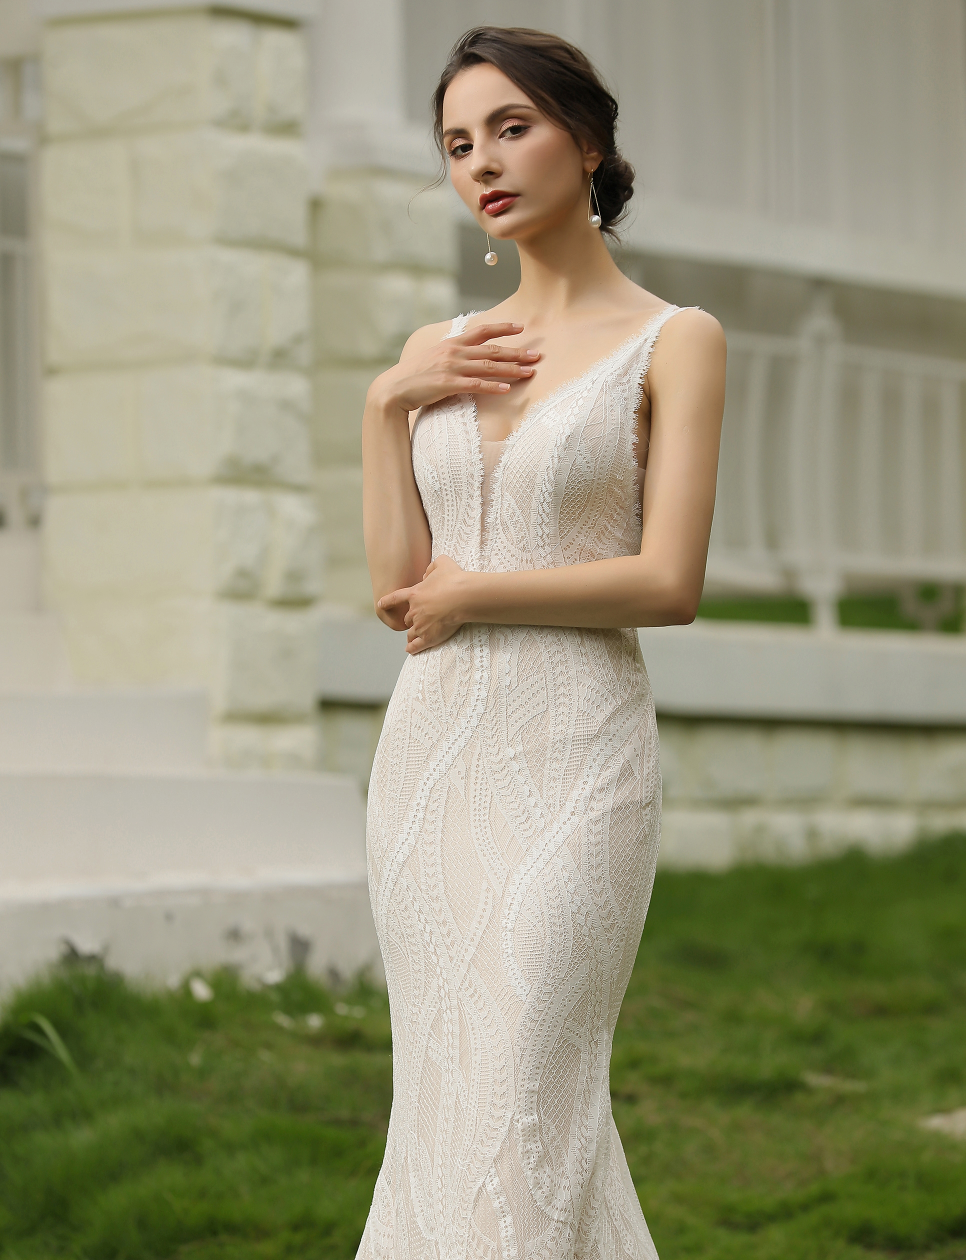 Slim and Sexy Wedding Gown With Illusion Back